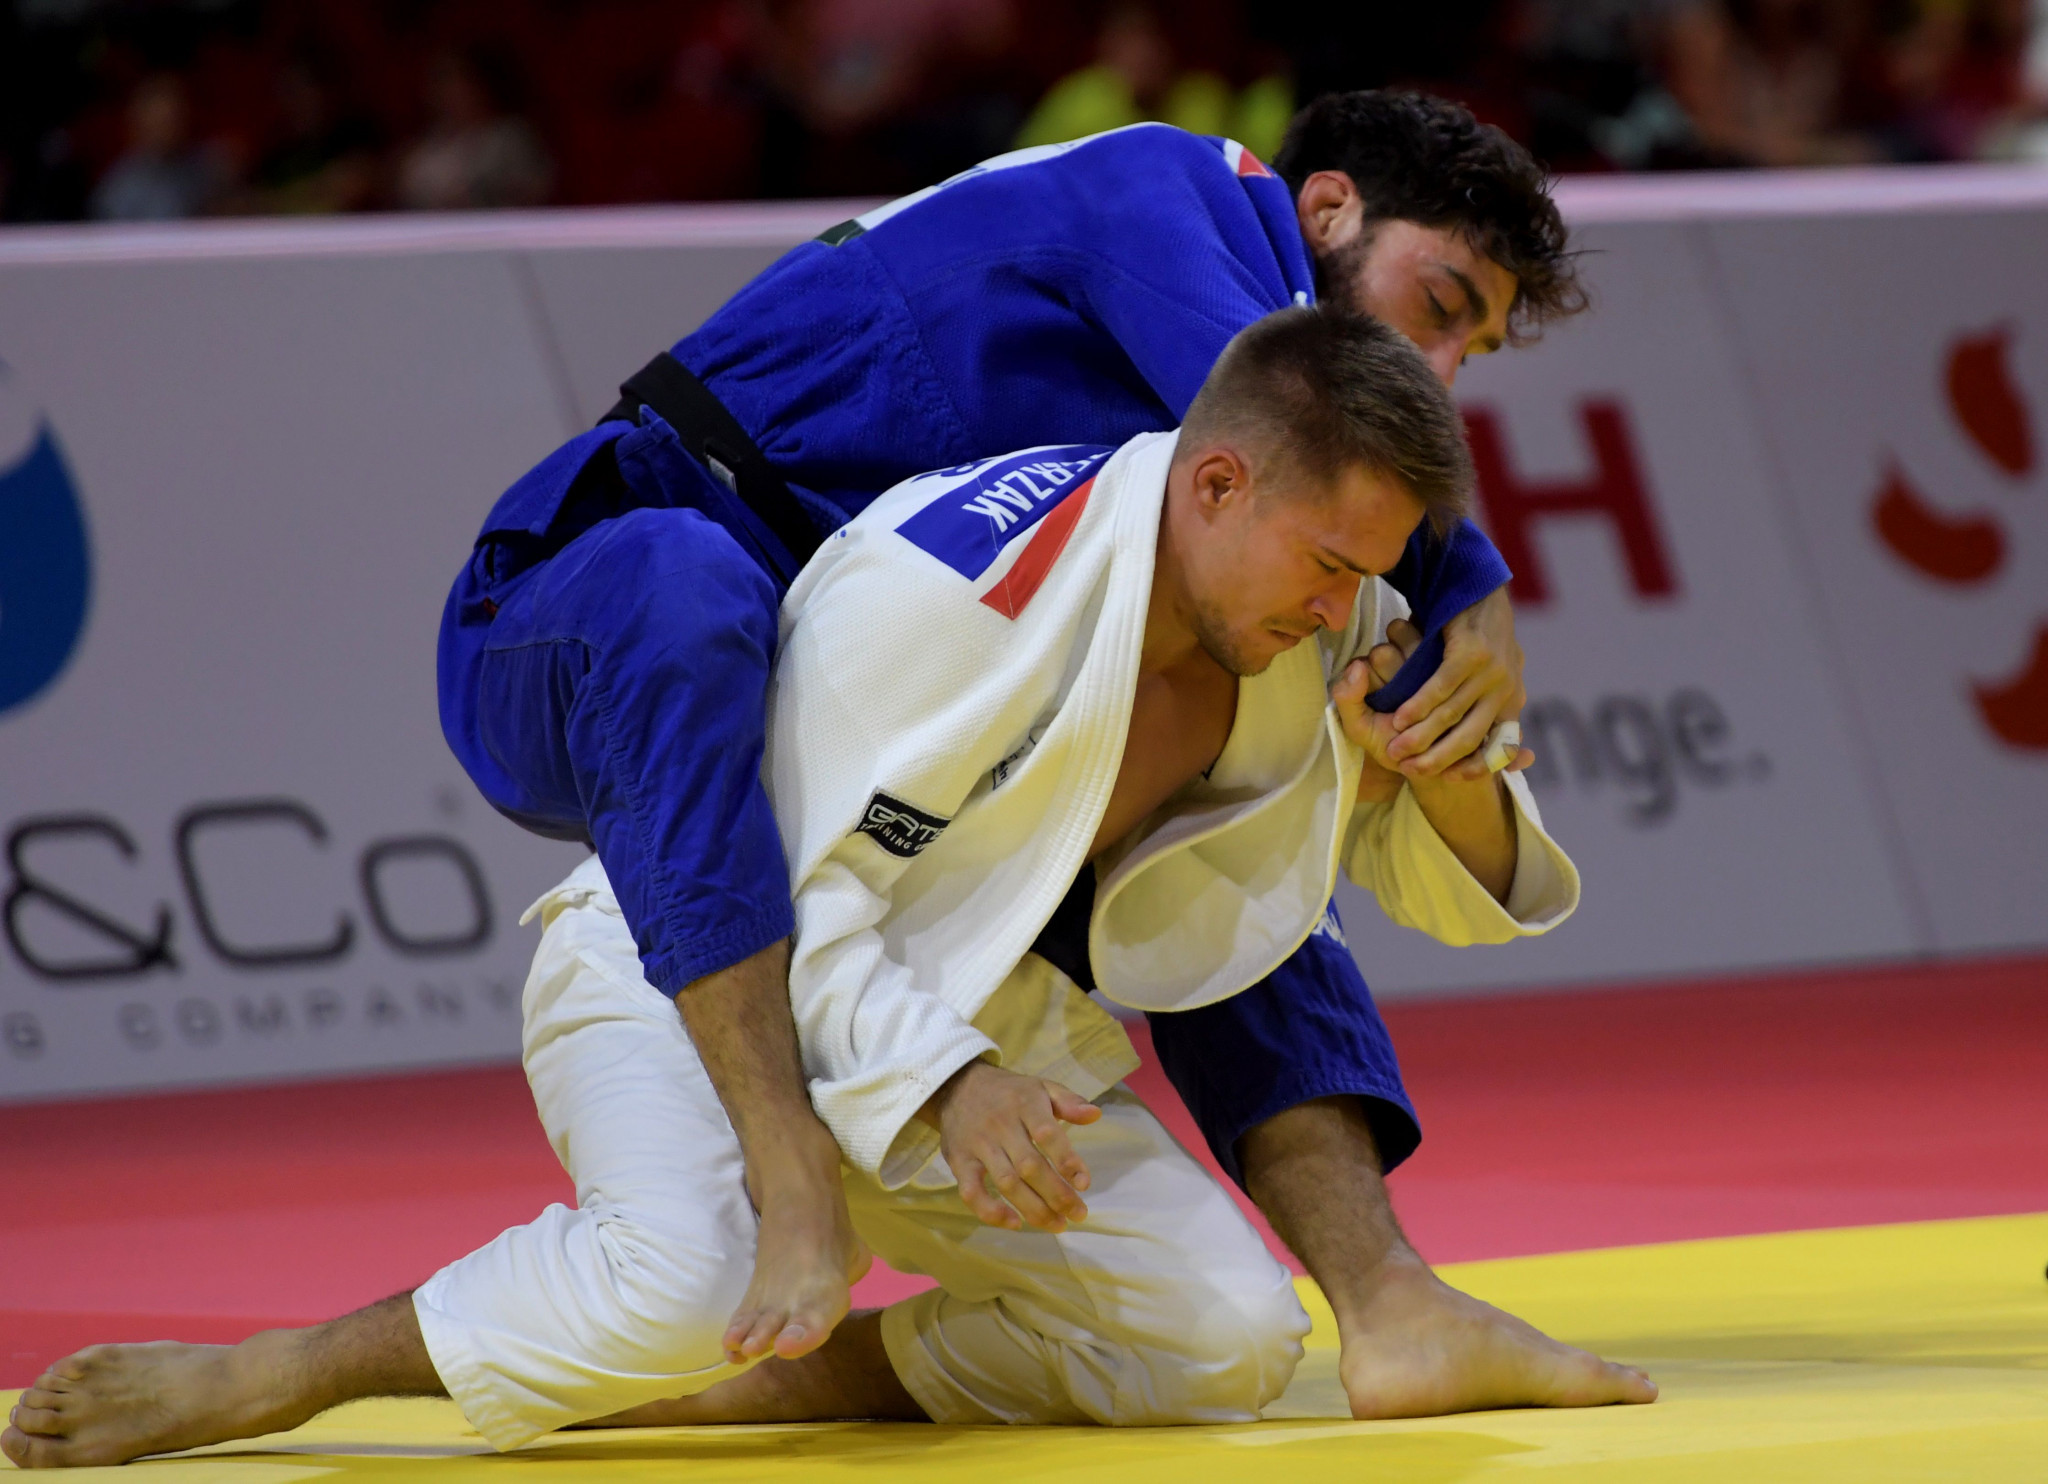 Alexander Wieczerzak of Germany and Matteo Marconcini of Italy were surprise finalists in the men's under 81kg event ©Getty Images